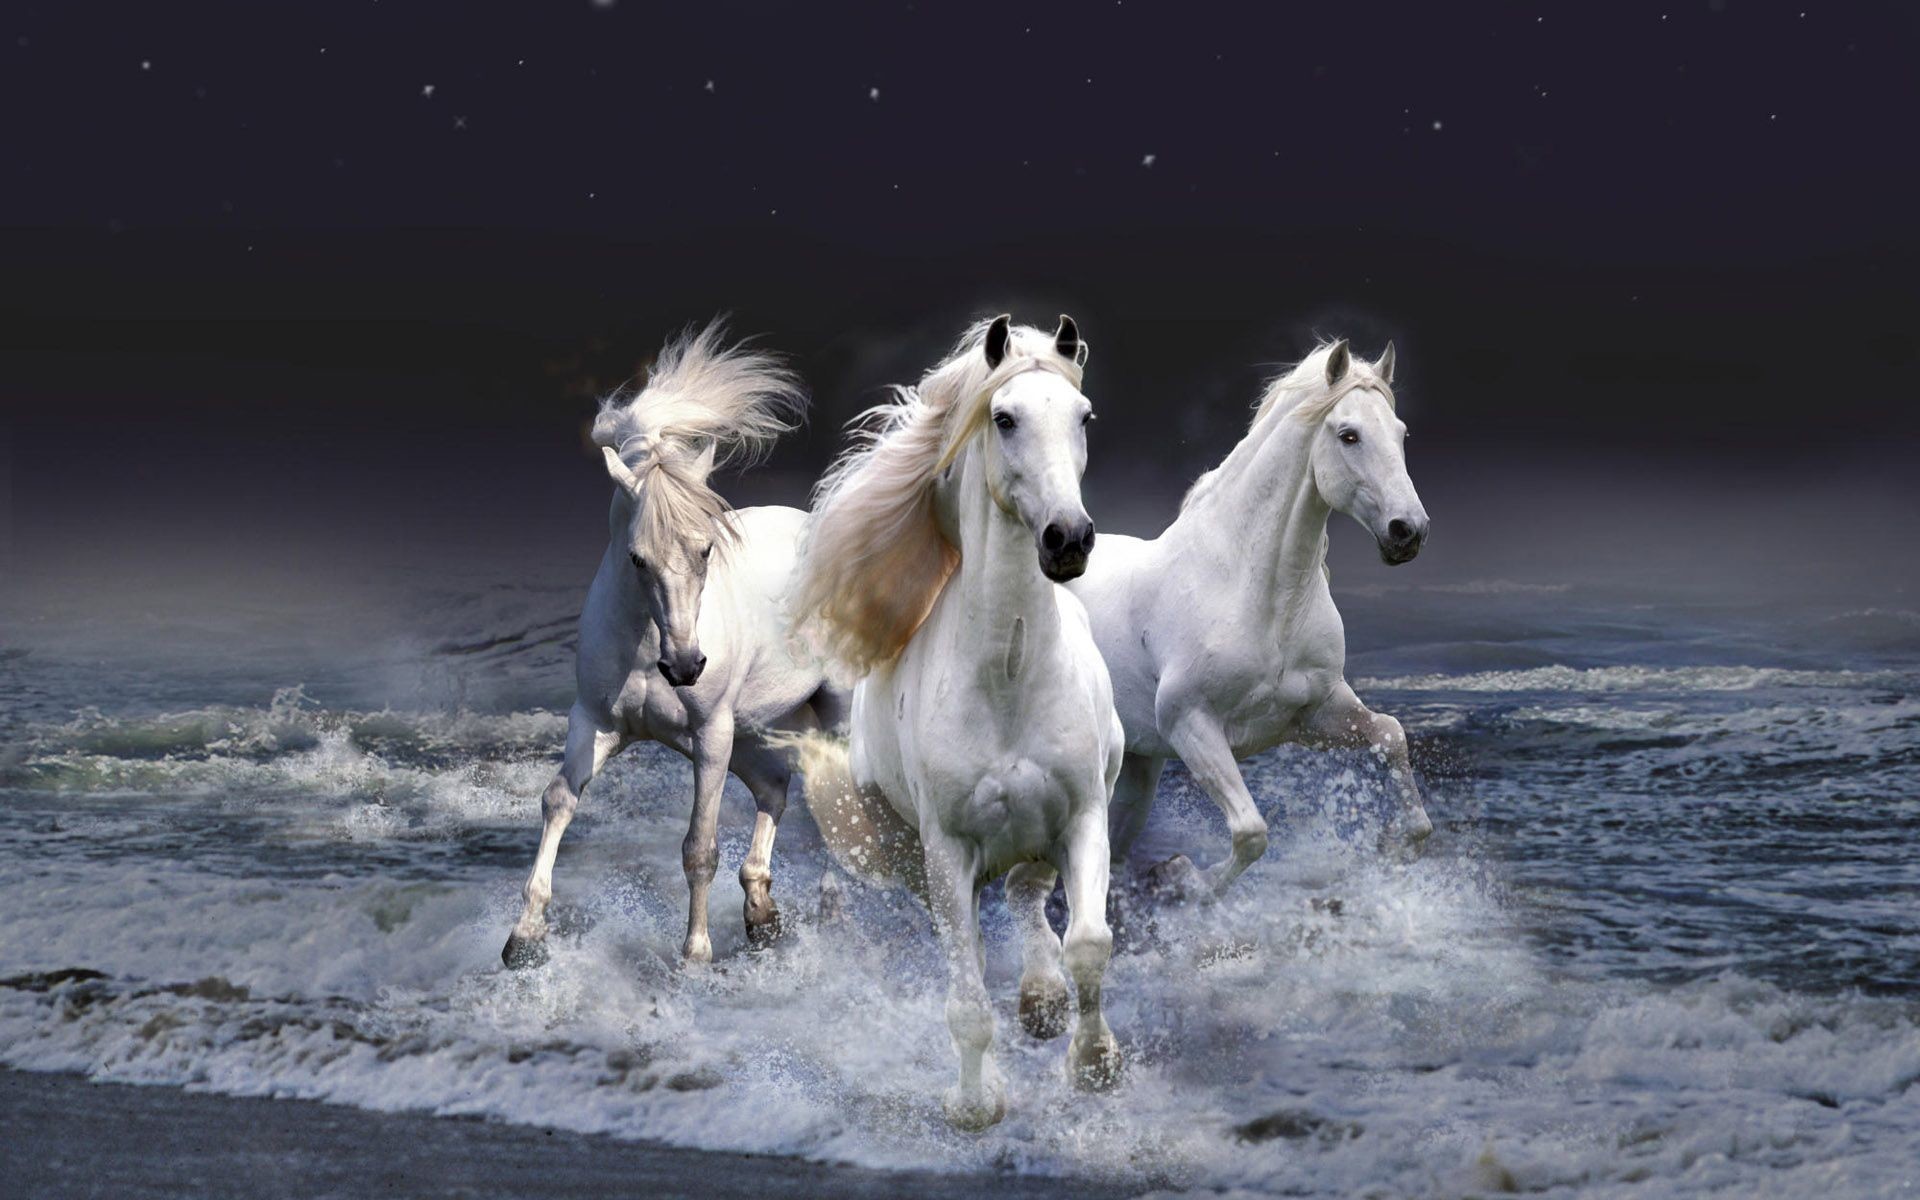 1920x1200  Wild Horses And The Sea Wallpaper